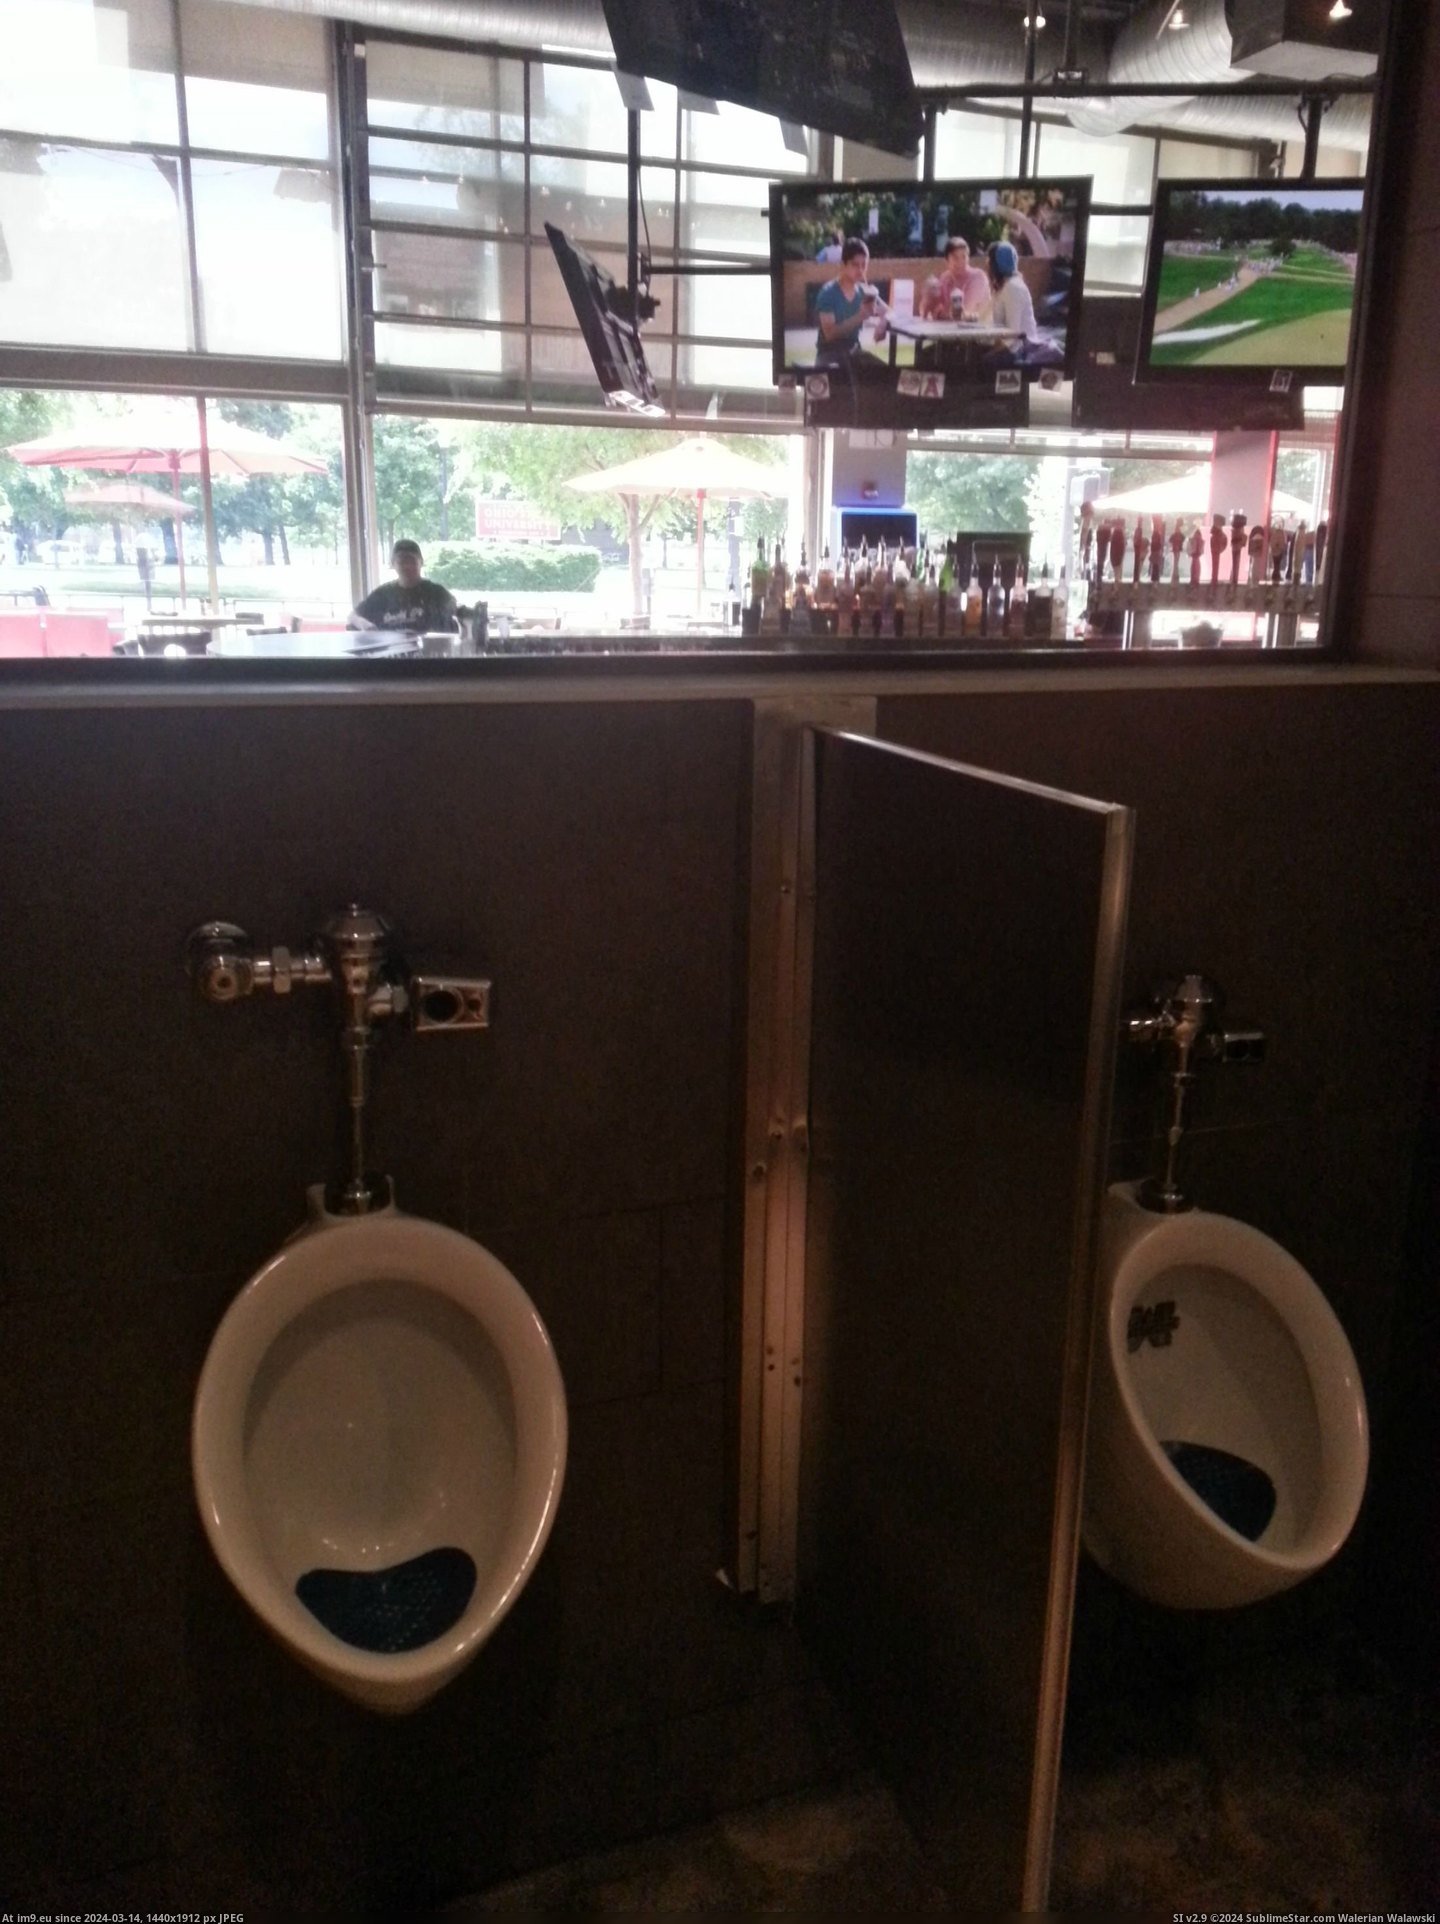 #One #You #Game #Bar #Sports #Bathrooms #Way #Glass #Any [Mildlyinteresting] This sports bar has one way glass in the bathrooms so you don't miss any of the game Pic. (Obraz z album My r/MILDLYINTERESTING favs))